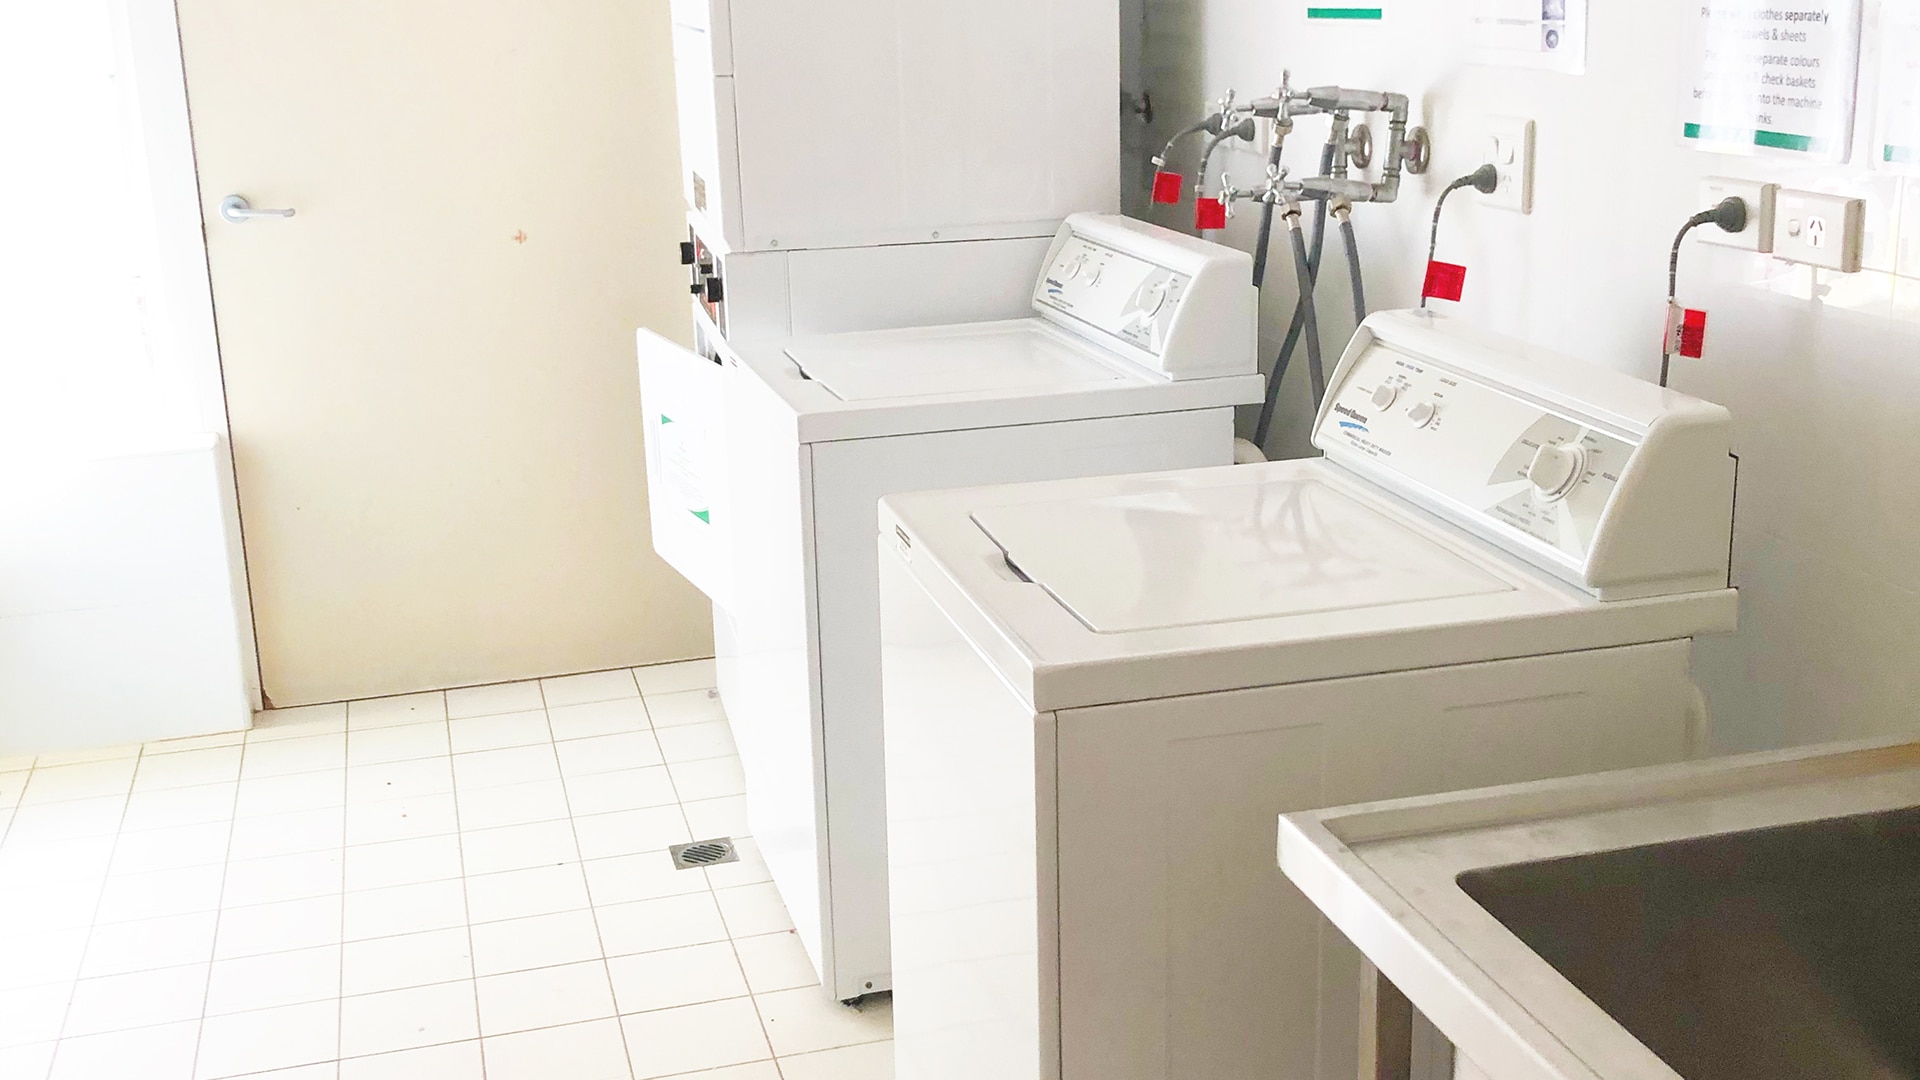 The laundry with two washing machines and dryers.